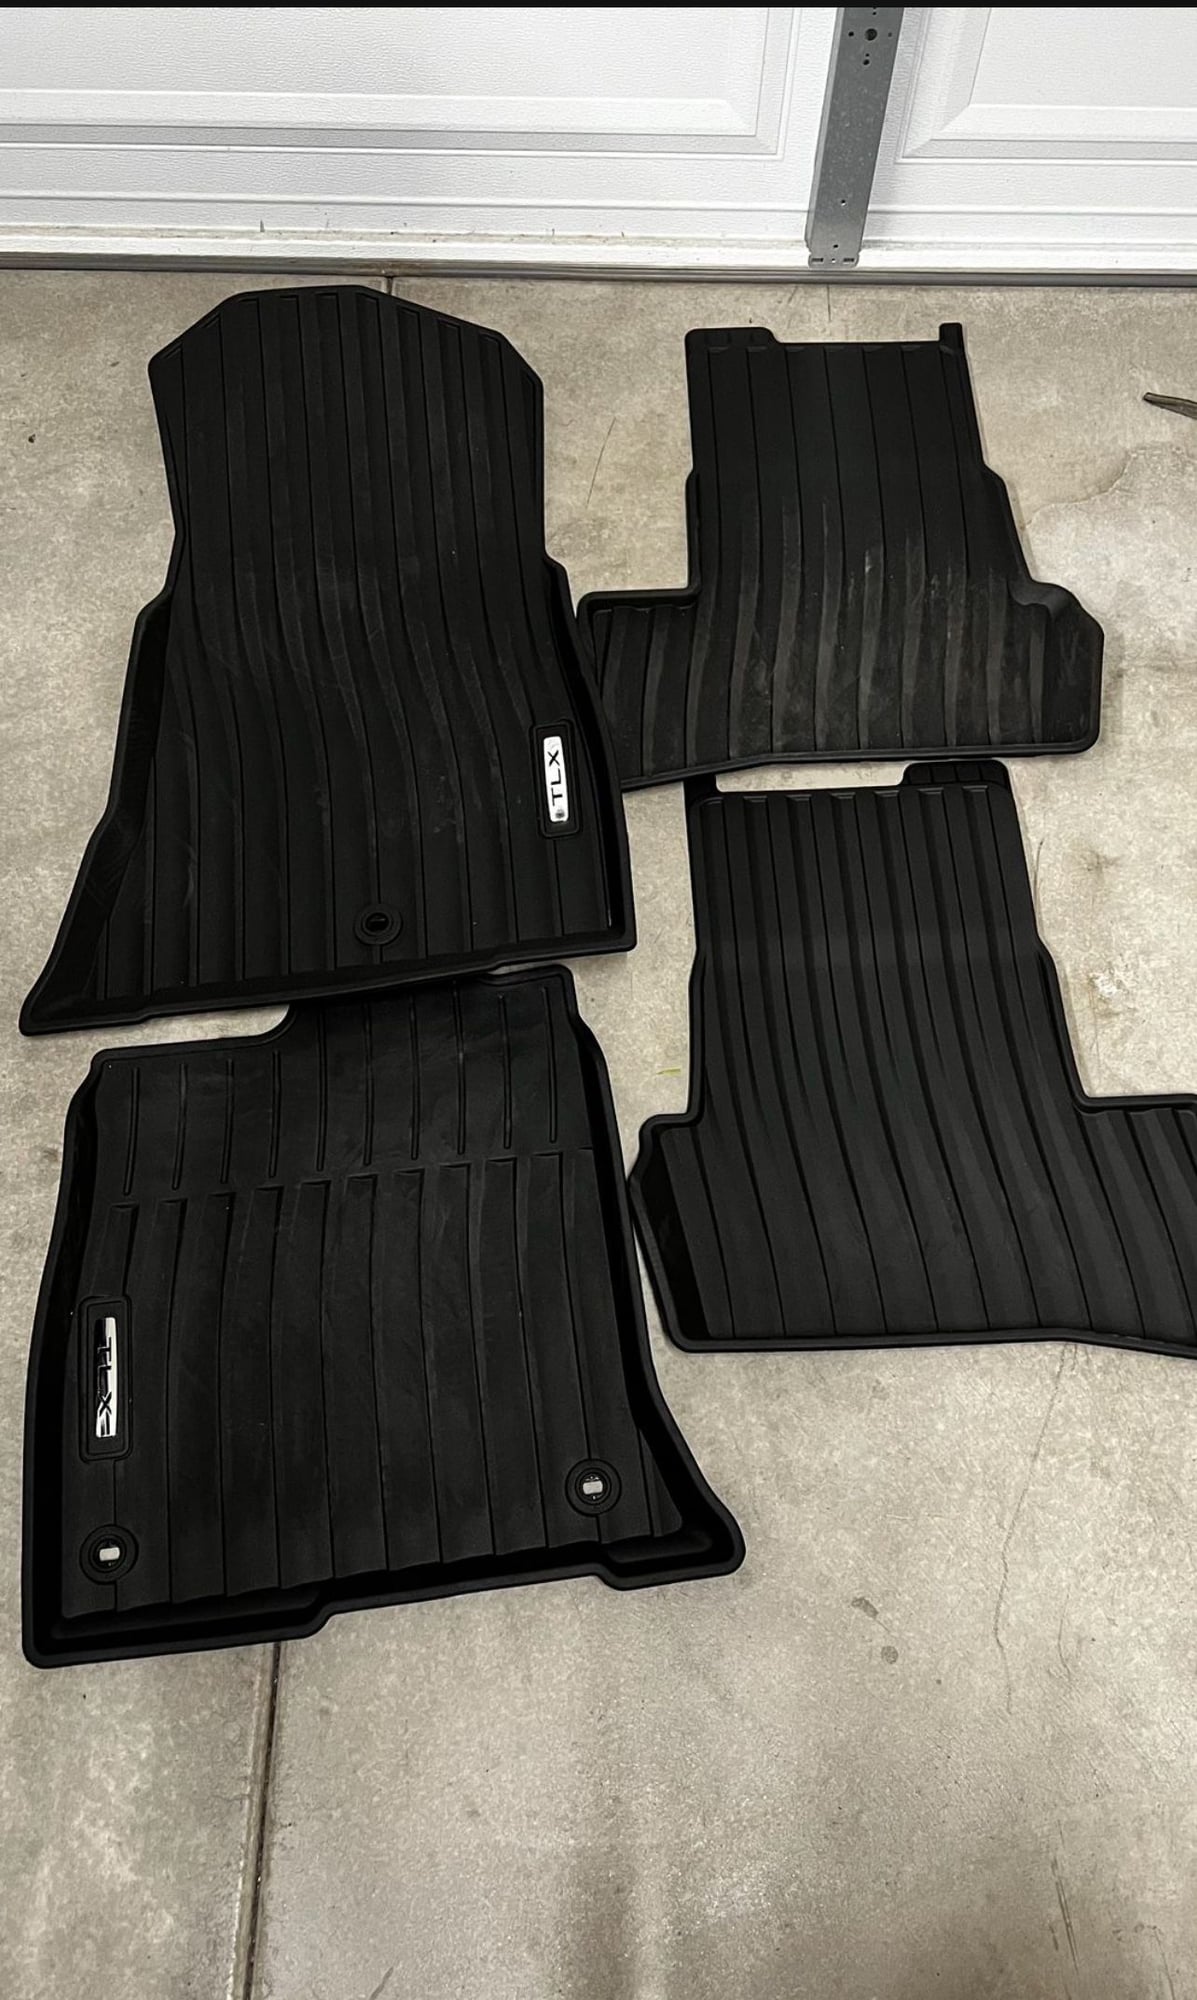 Accessories - FS: 21 Acura TLX All Weather OEM Floor Mats - Used - All Years  All Models - San Gabriel, CA 91776, United States